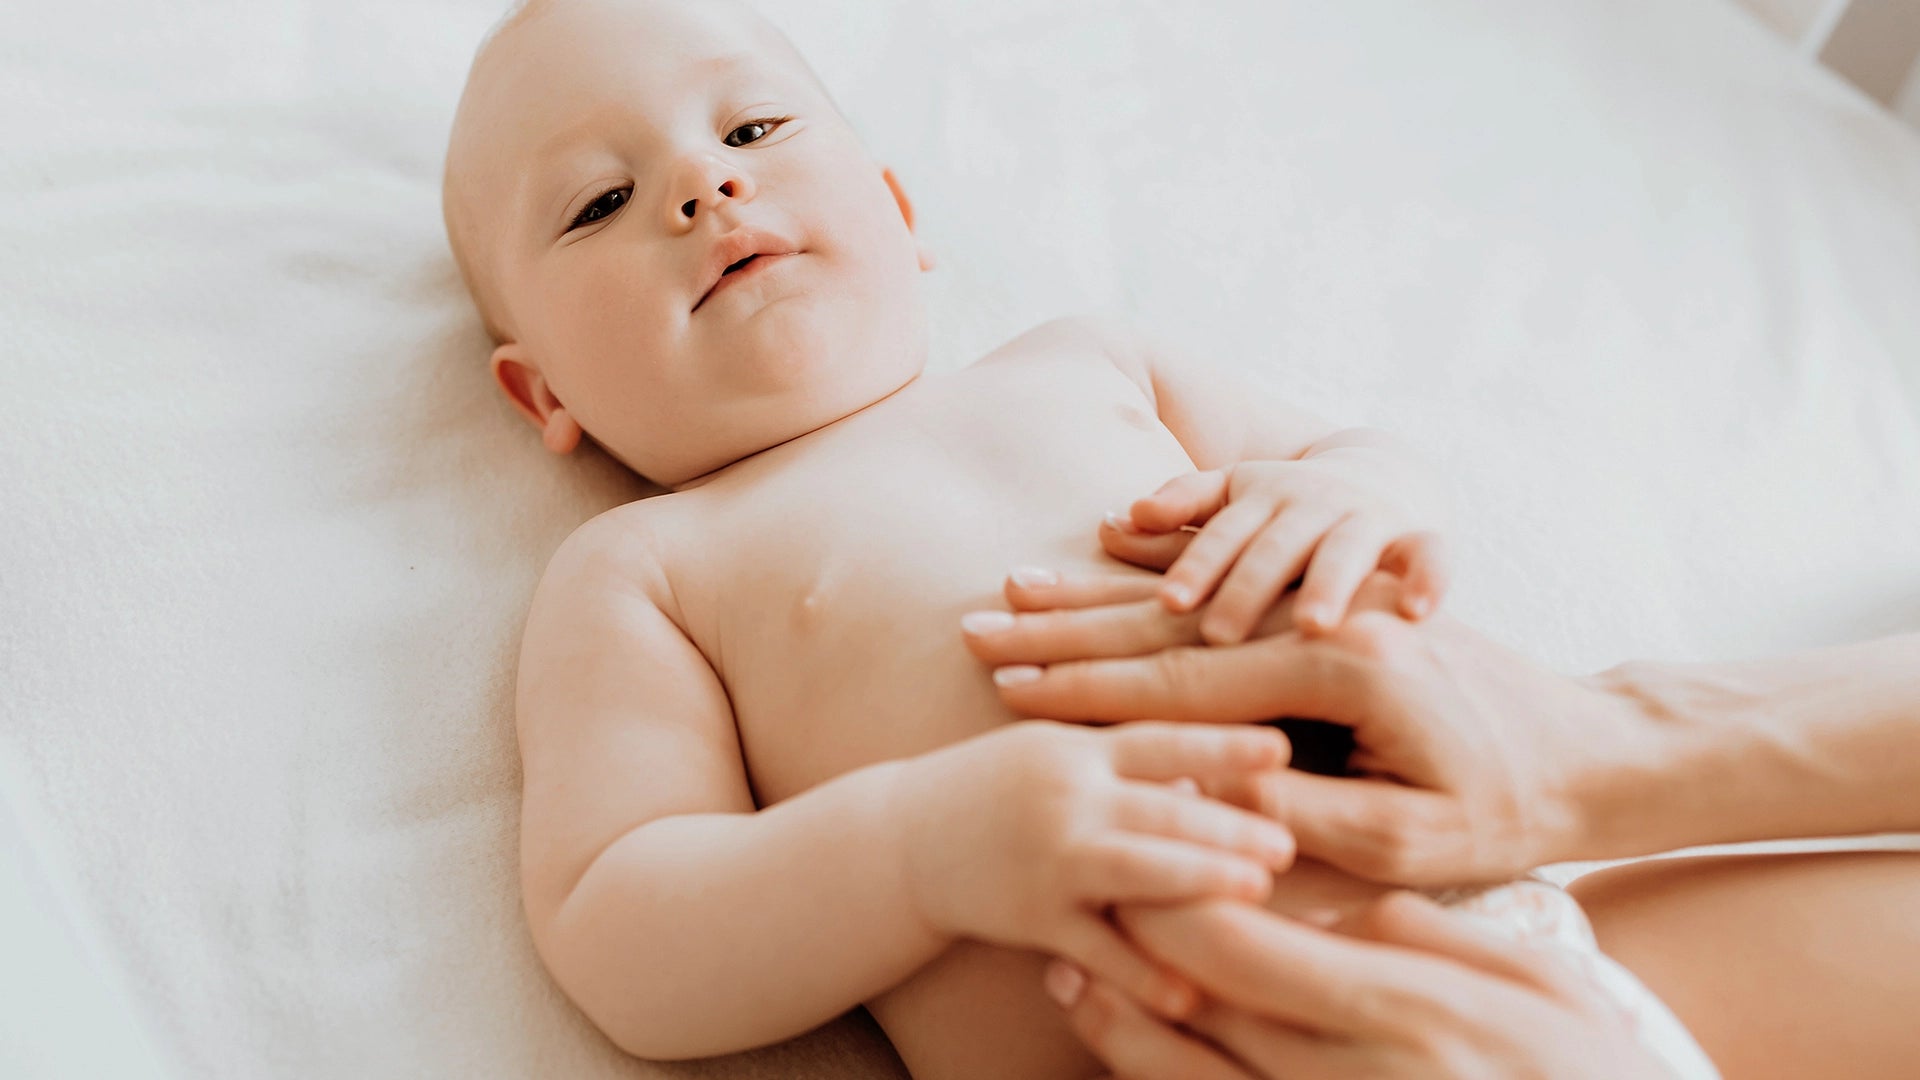 The magic touch: Your guide to baby massage